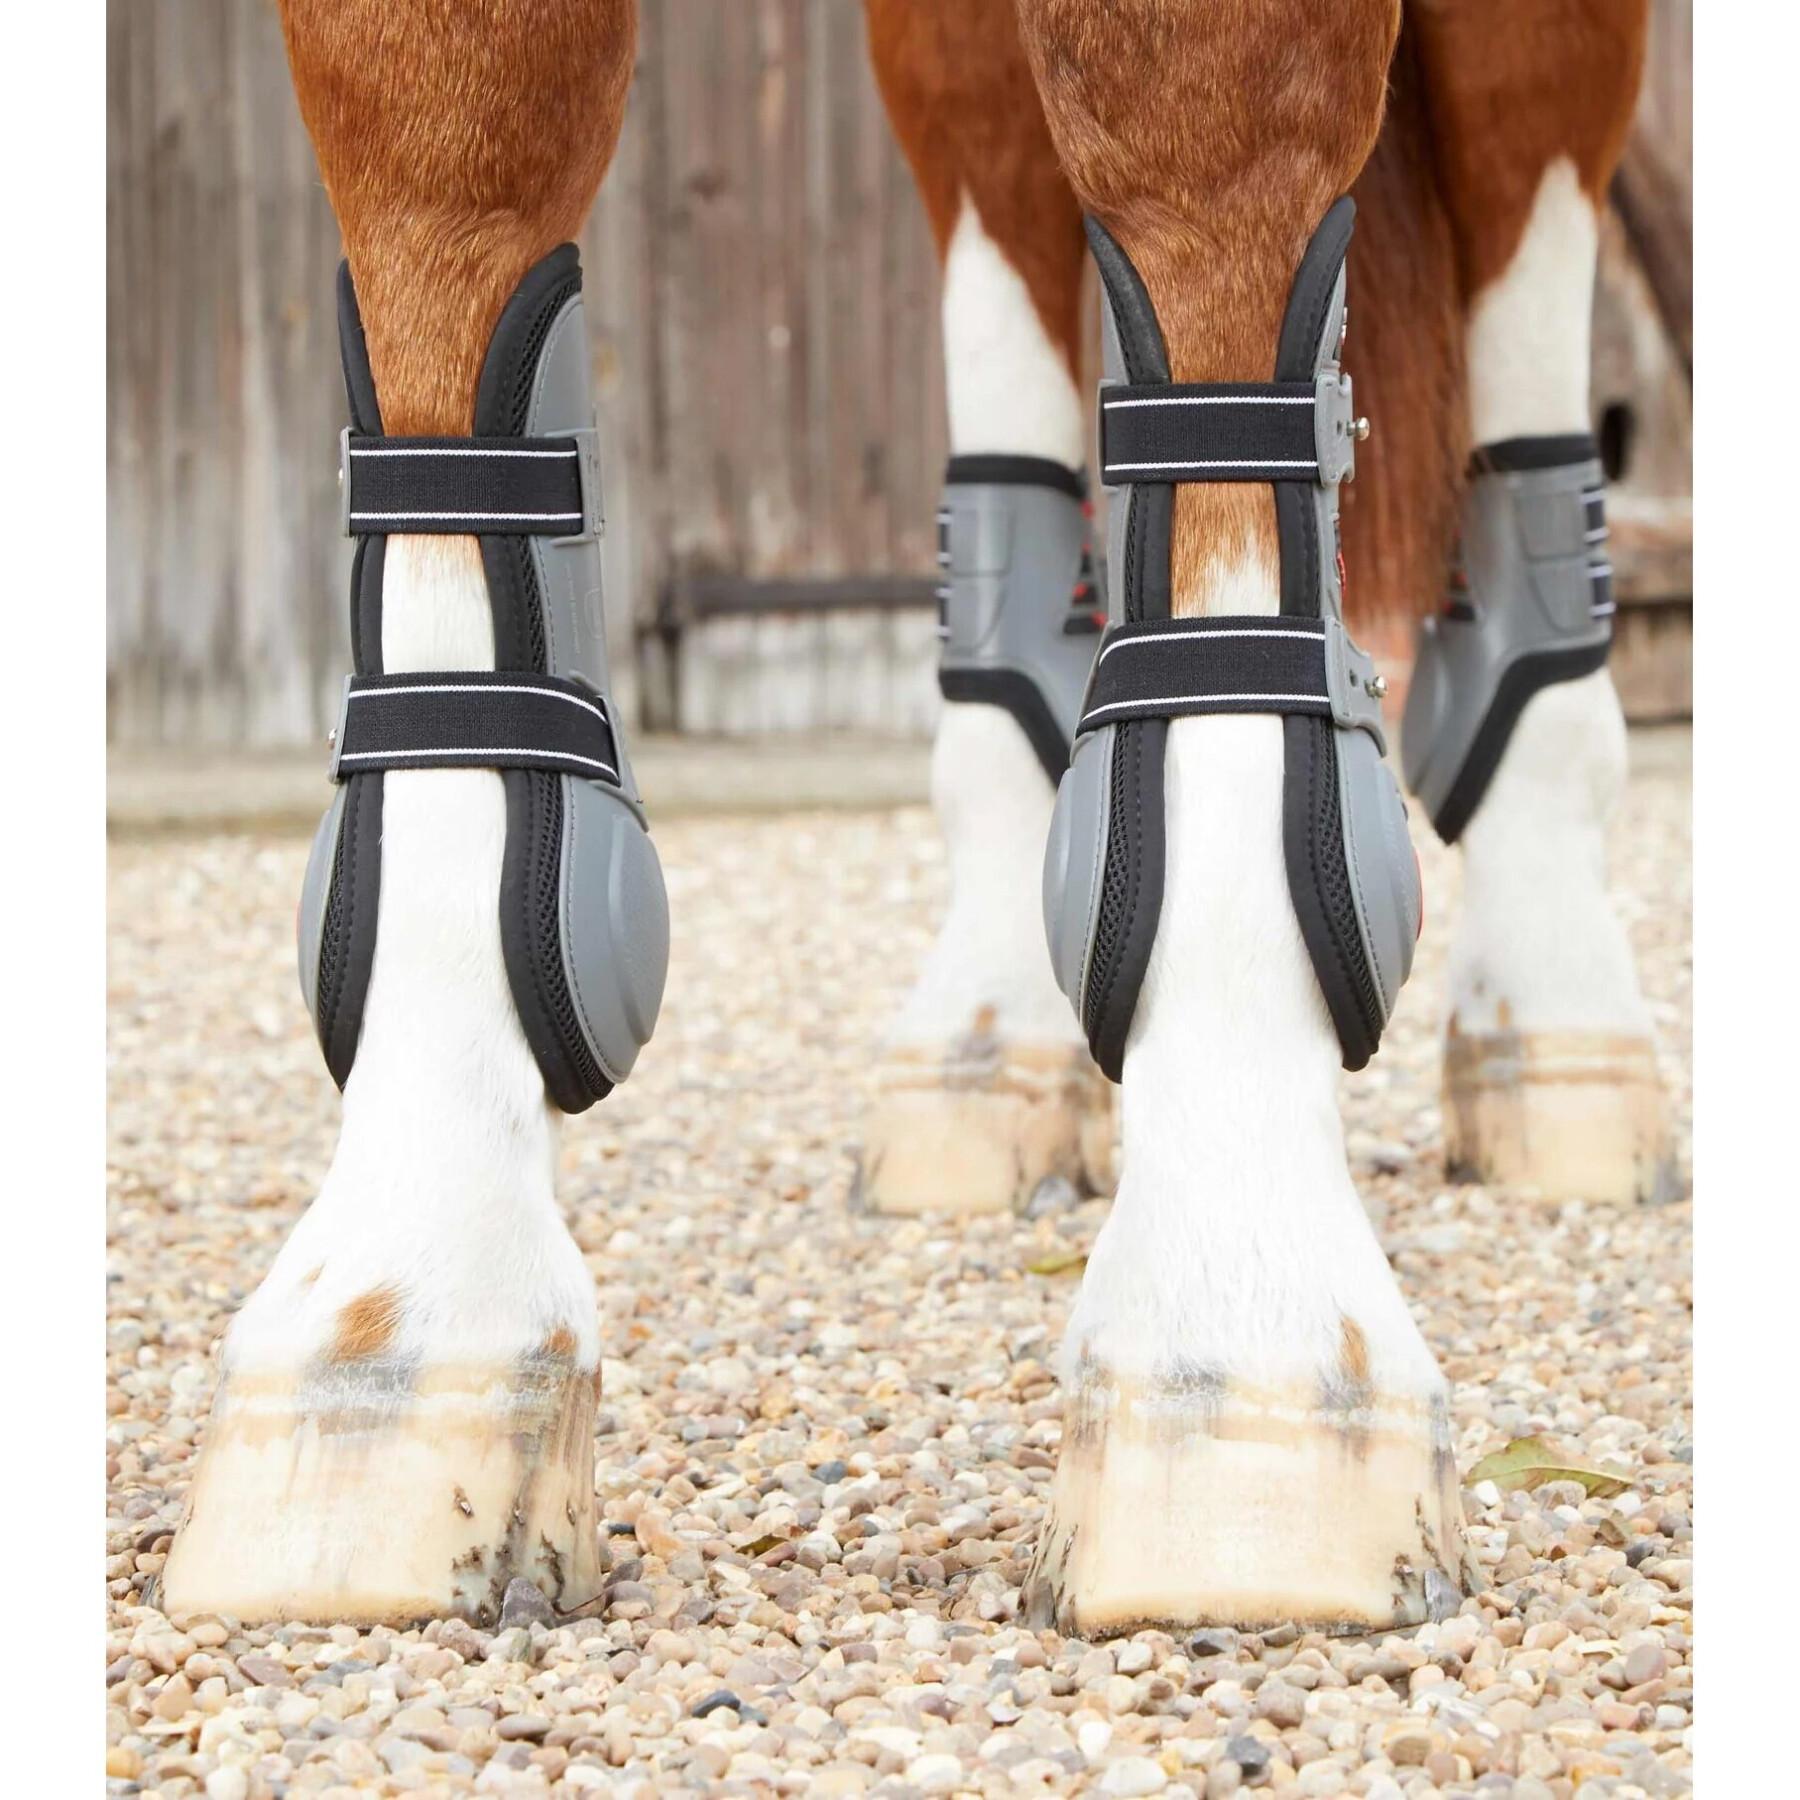 Tendon protector for horses Premier Equine Kevlar Airtechnology